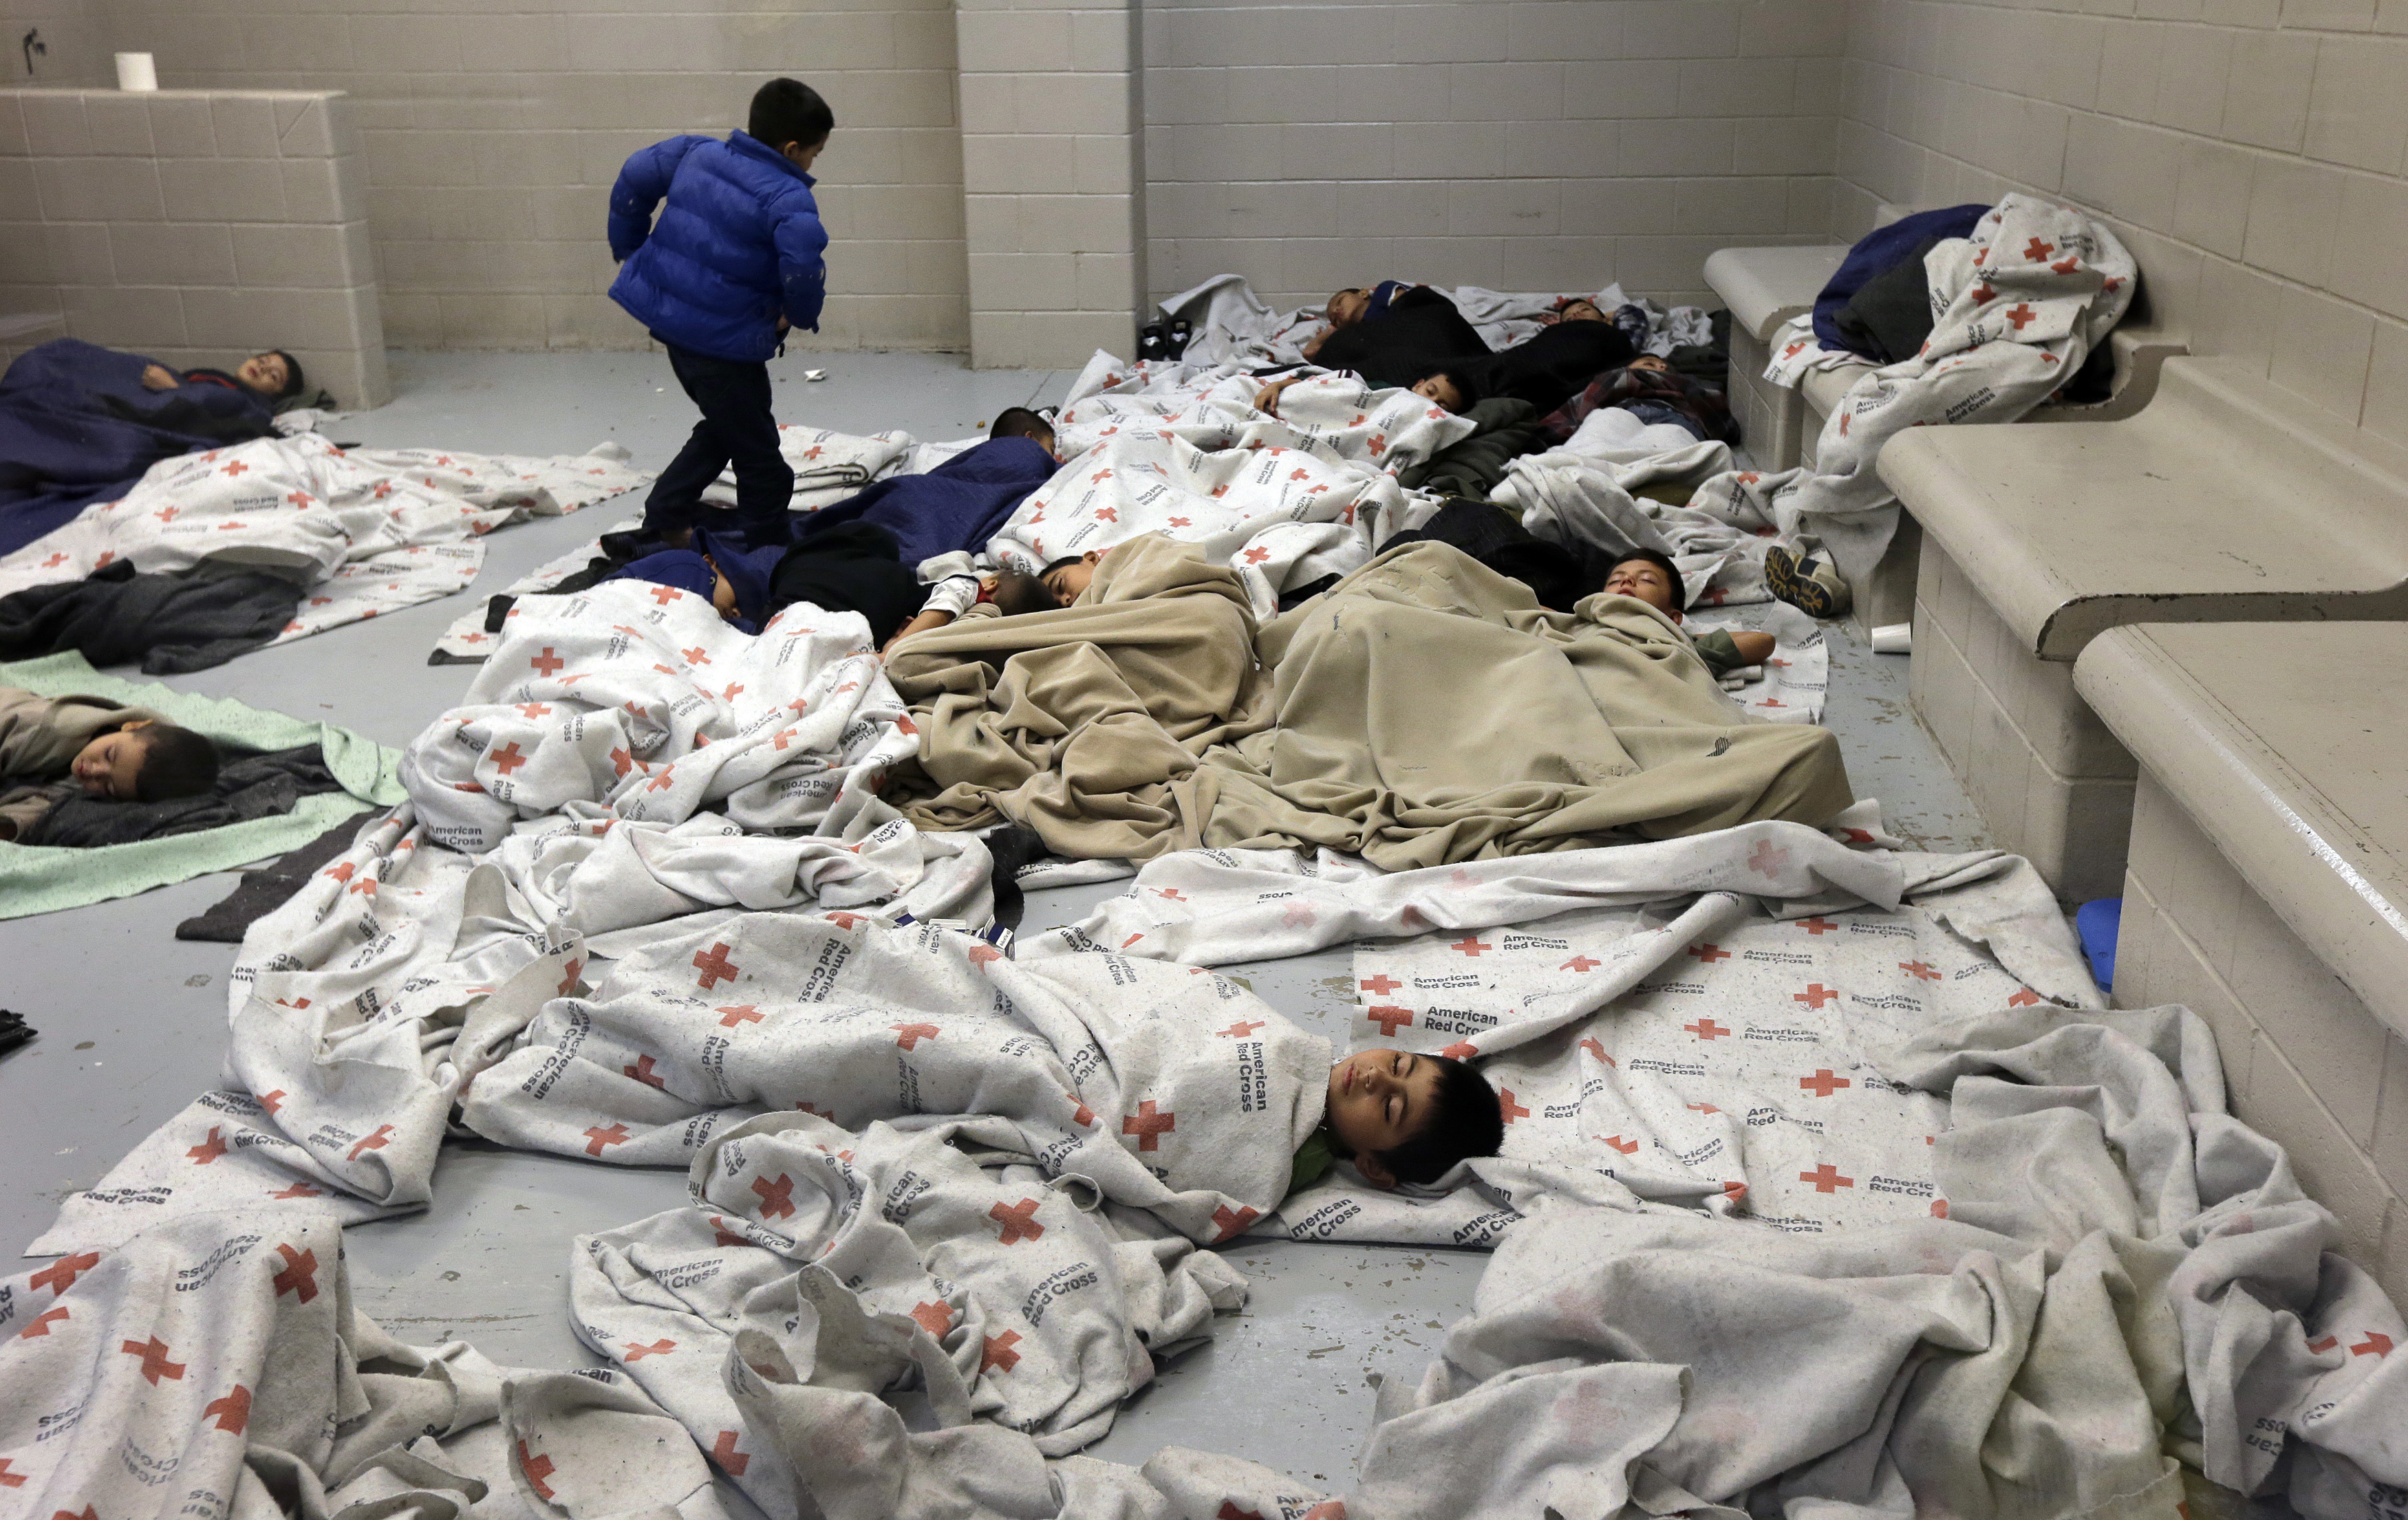 This Is What an Overcrowded Holding Center for Migrant Children Looks Like